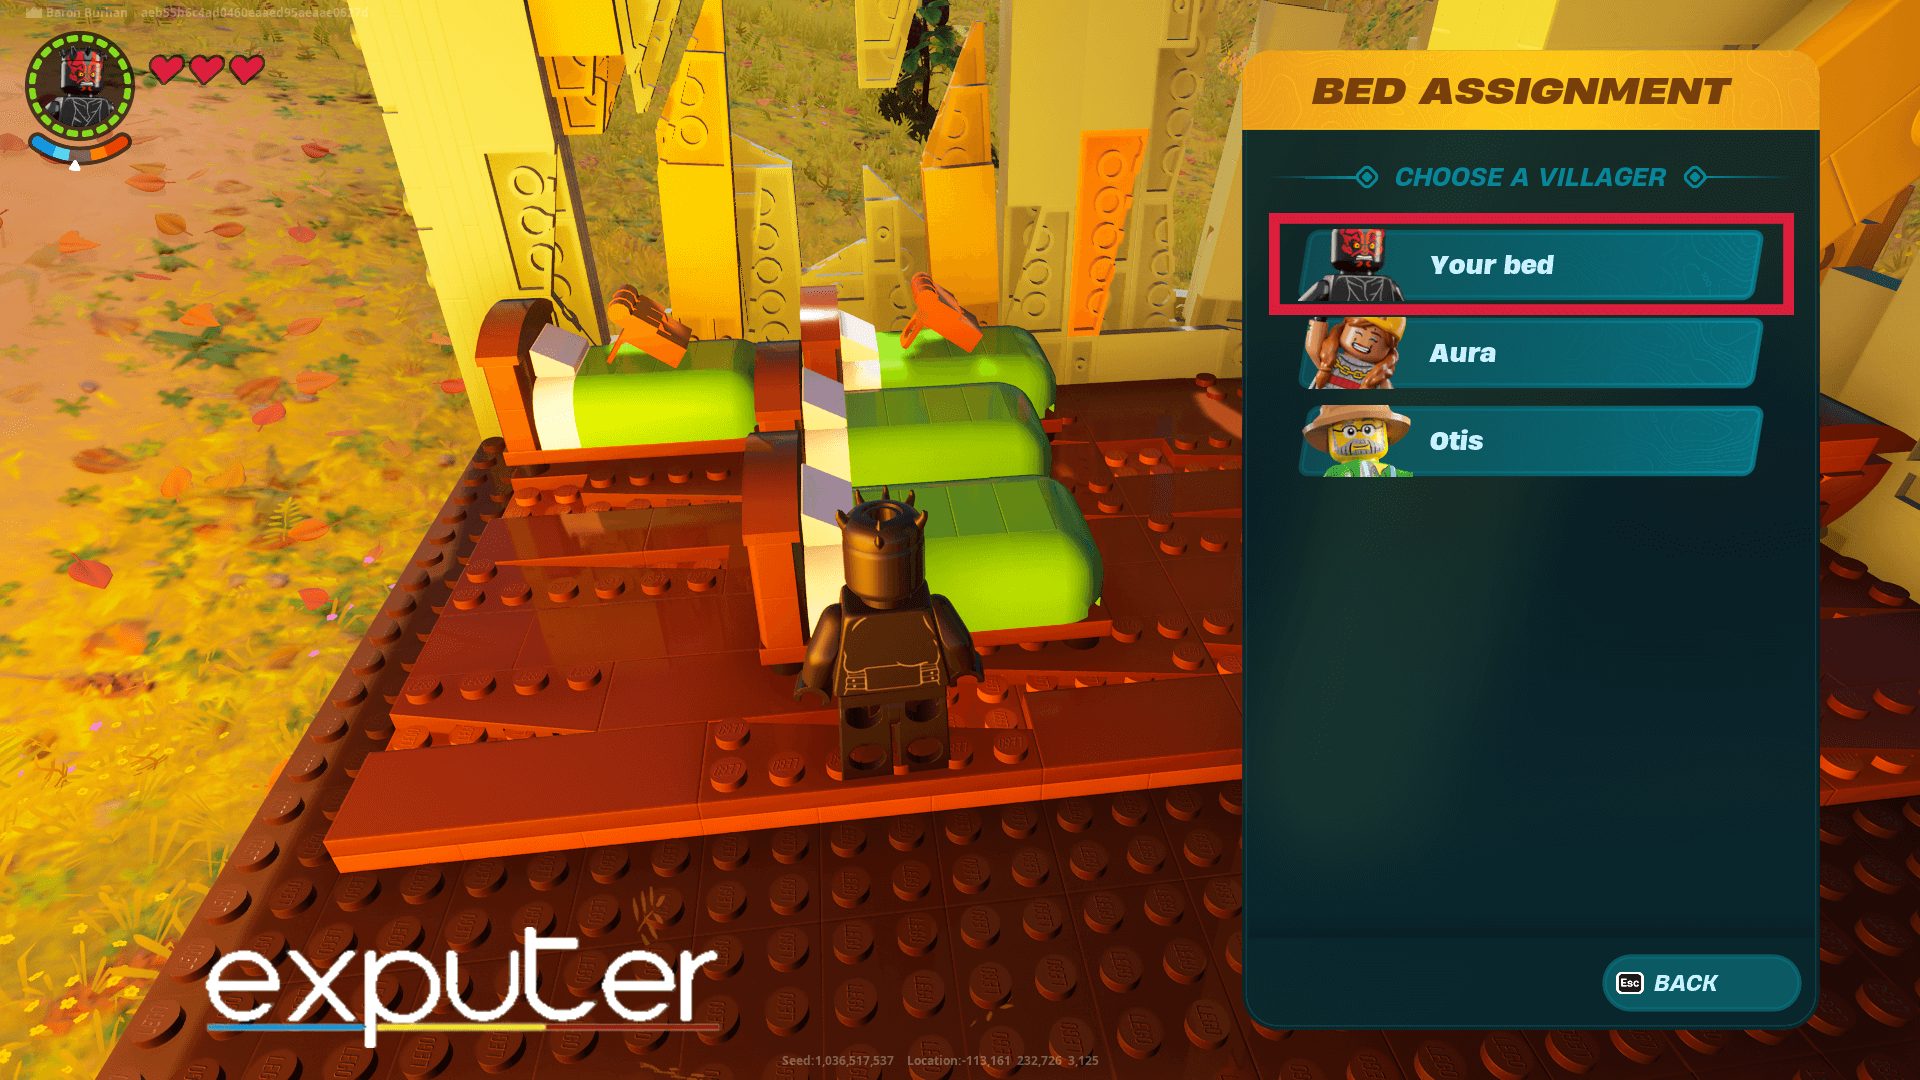 Assigning a bed to yourself. (image captured by eXputer)